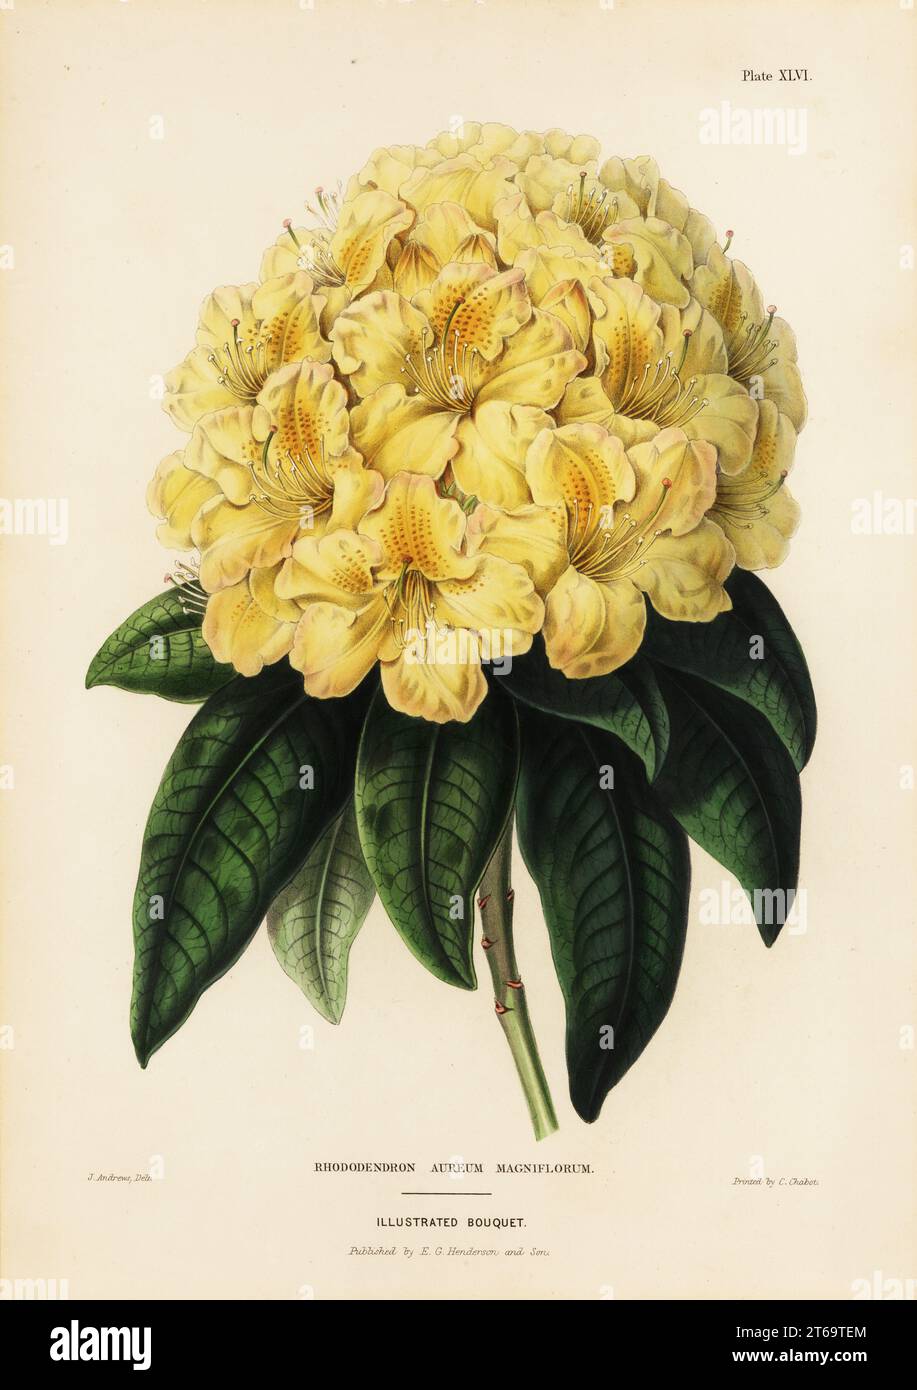 Golden rhododendron, Rhodendron aureum magniflorum. Handcoloured copperplate engraving by James Andrews from Edward Henderson and Andrew Hendersons The Illustrated Bouquet, consisting of figures with descriptions of new flowers, printed by C. Chabot, E.G. Henderon, London, 1857. Stock Photo